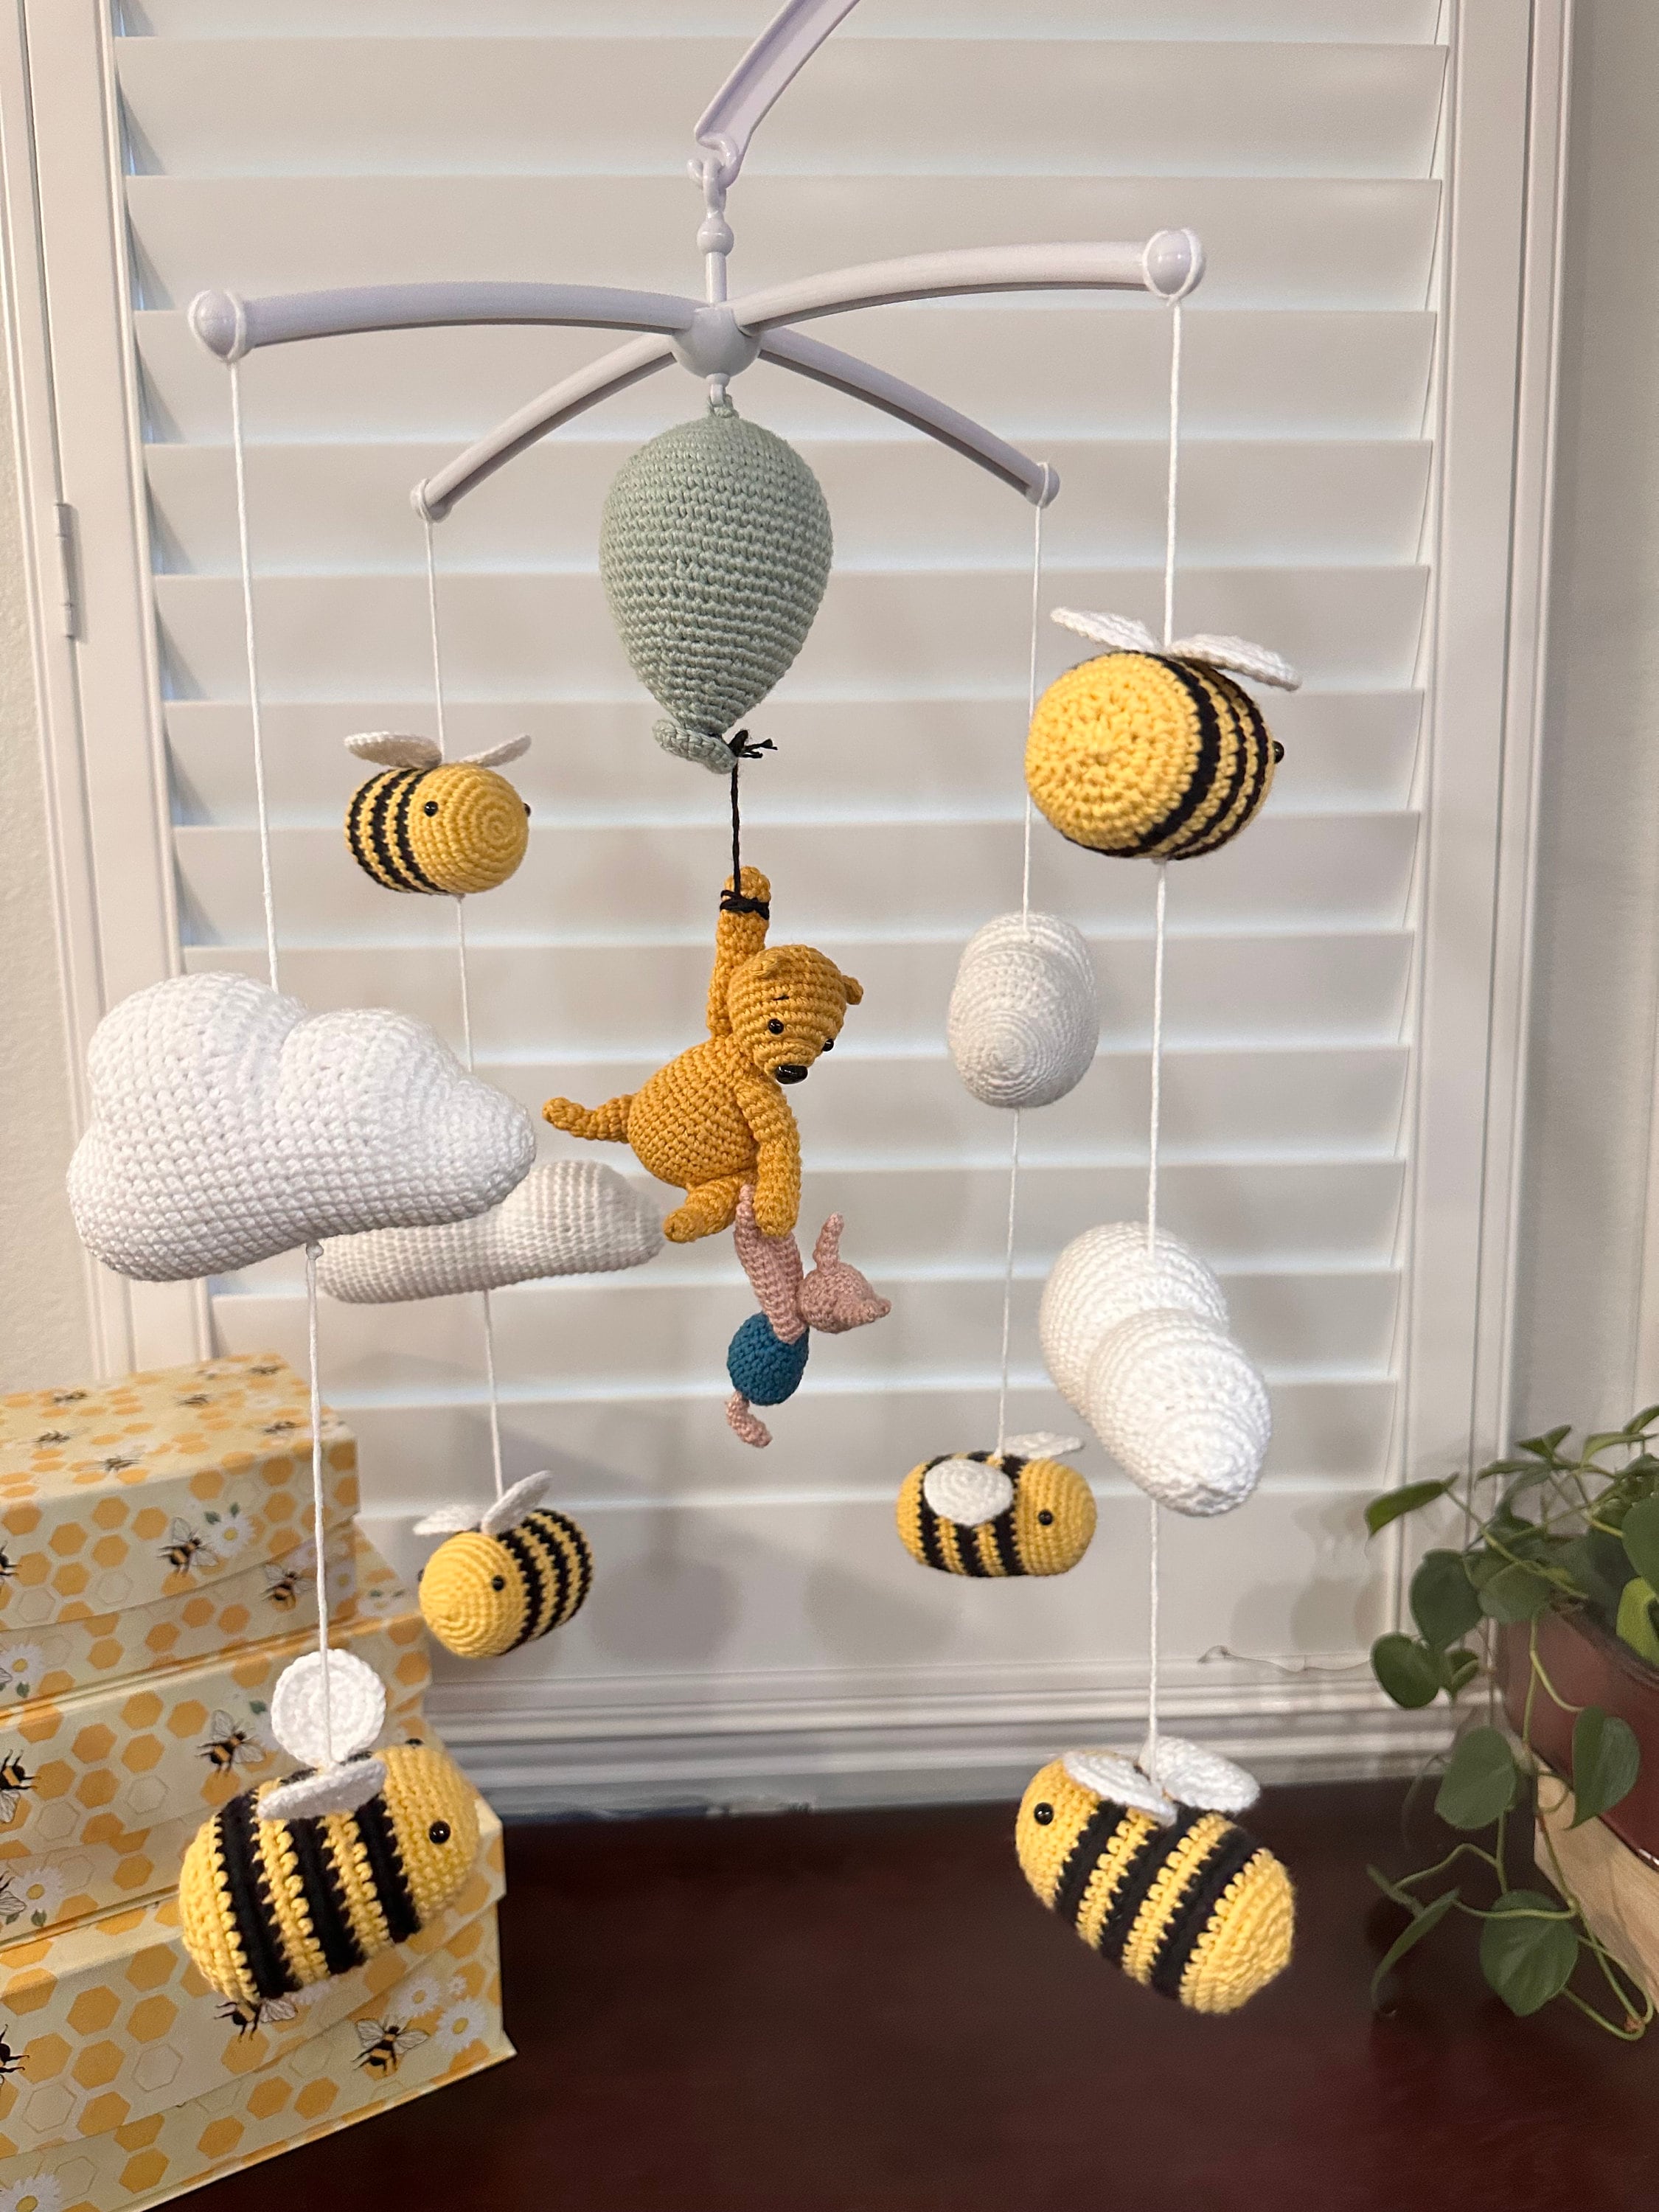 DISNEY Hunny Bee Pooh tethered Flying Honey Bee baby MOBILE GENUINE NEW